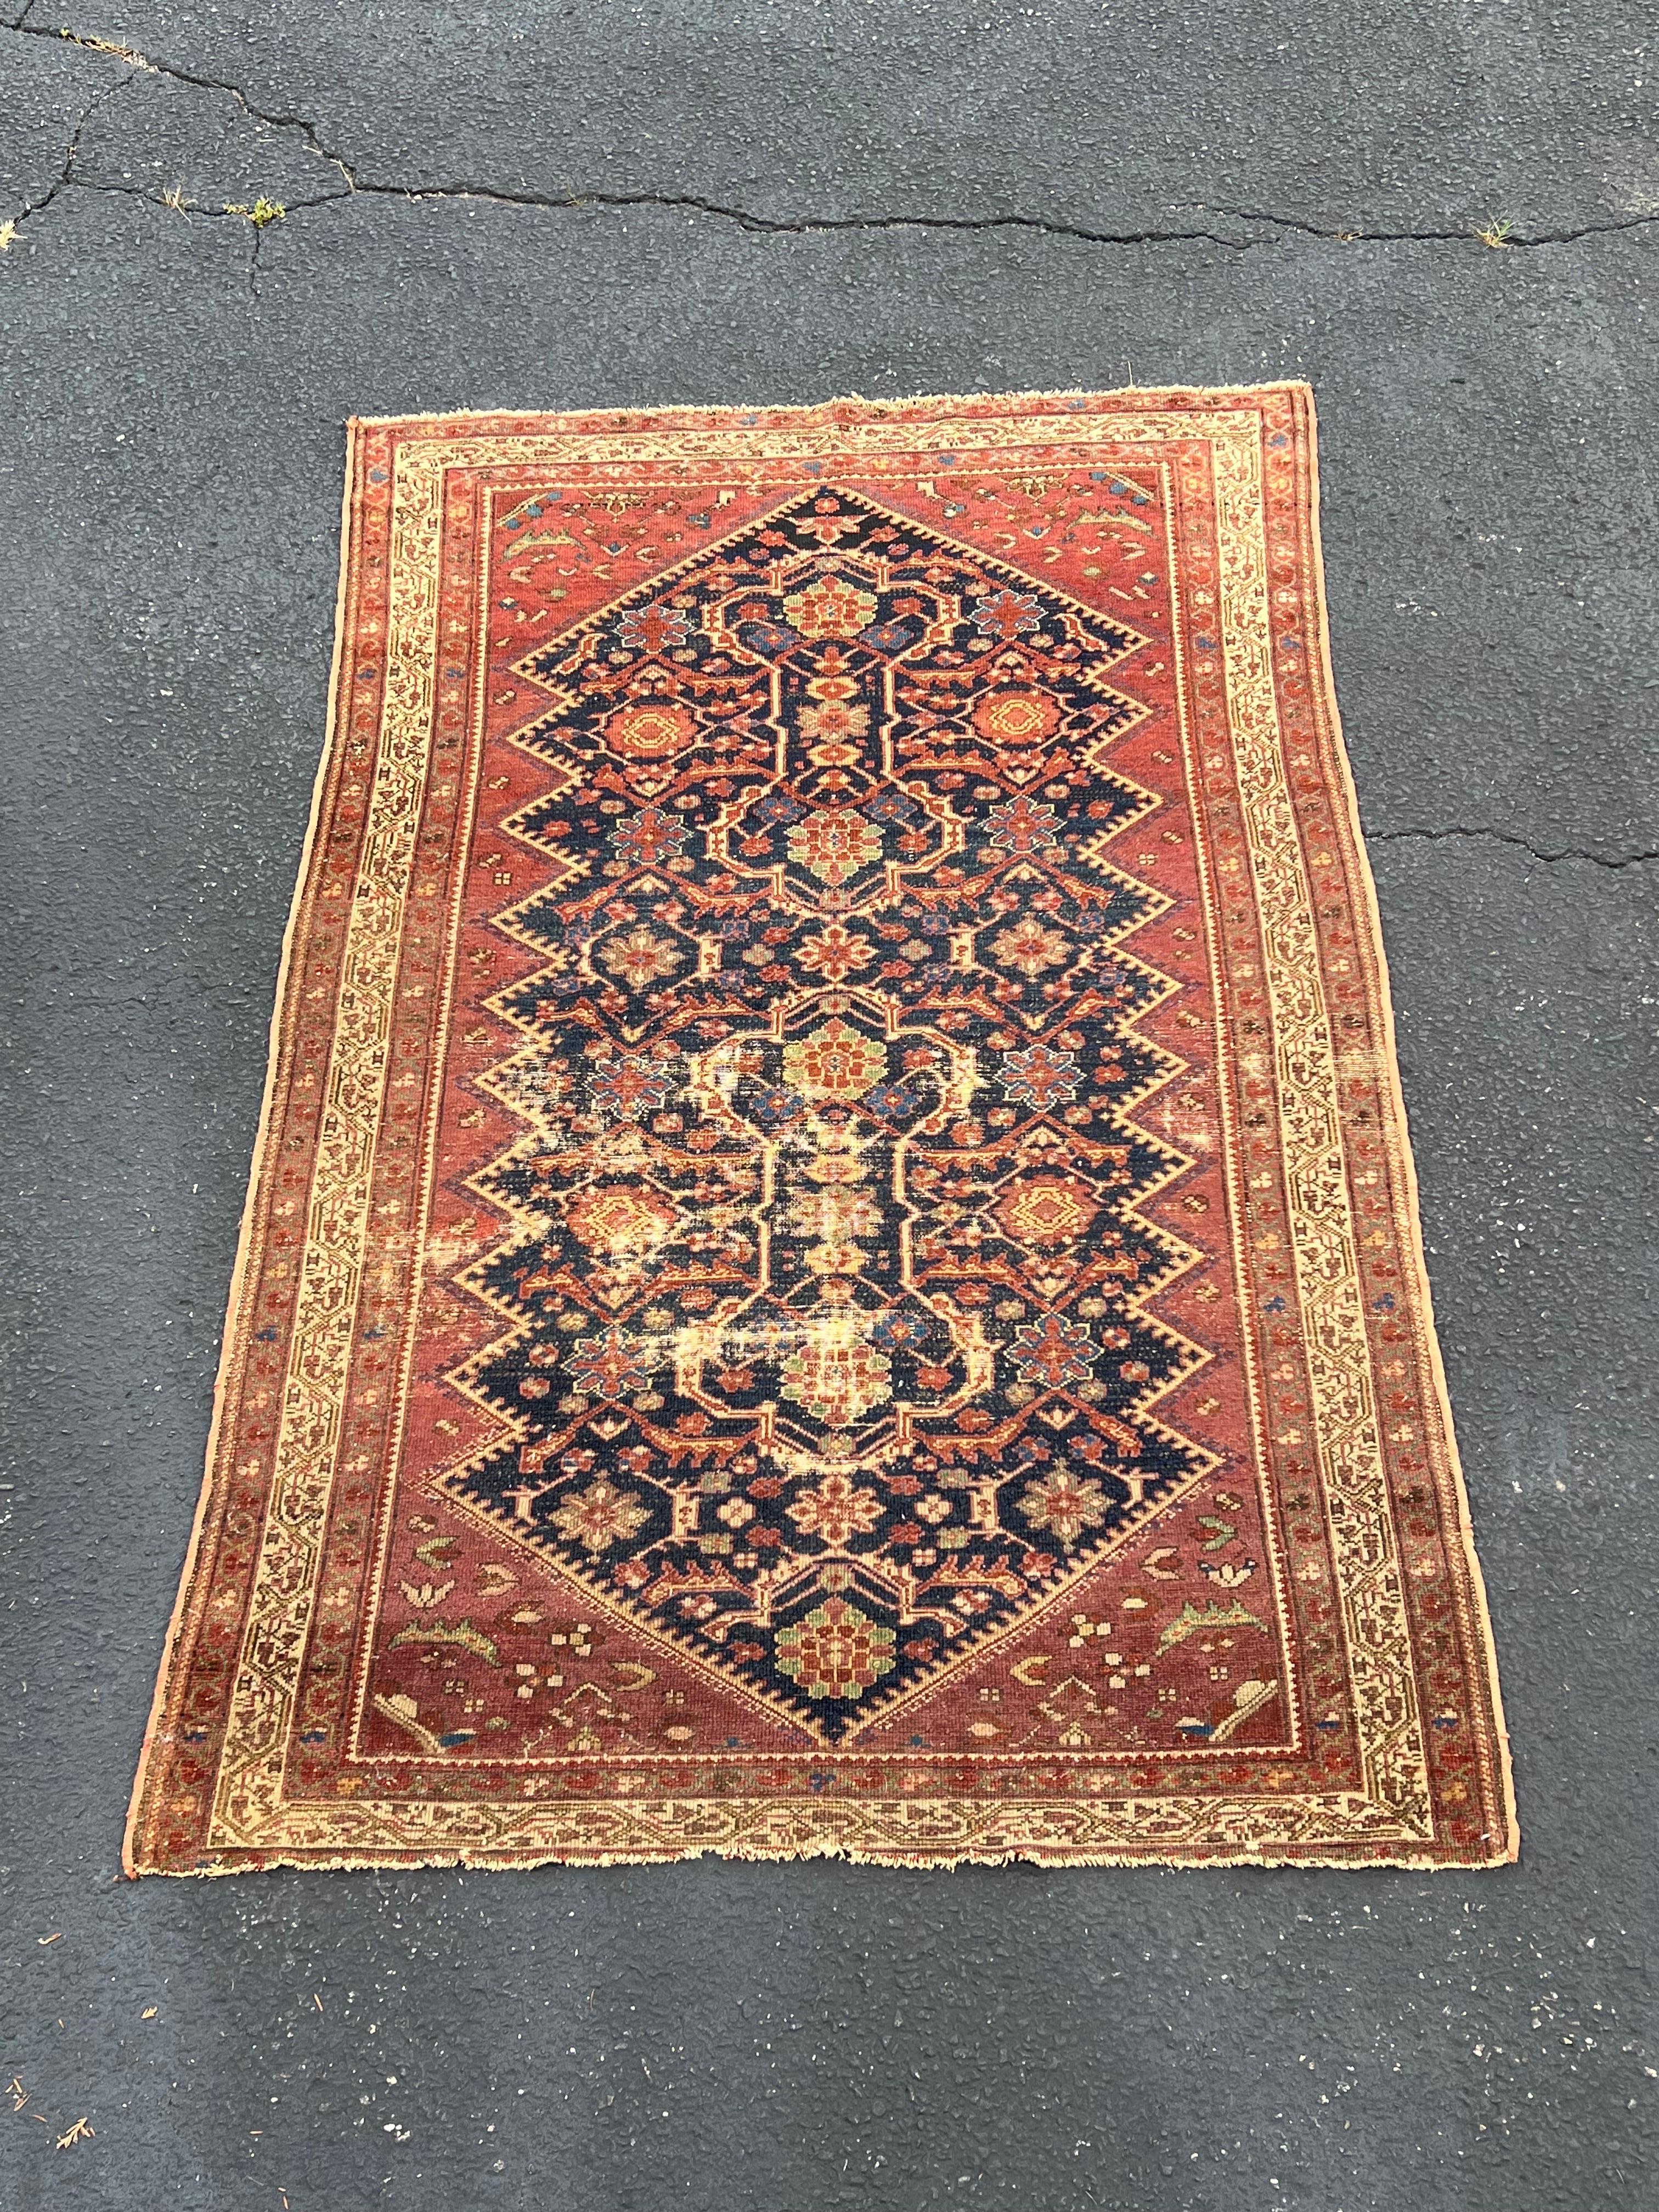 Kurdish Hamadan Tribal Rug .Most likely hand woven in Northern Iraq. We believe the binding is machine . Approximately 85 years old circa 1930-1939. . 4ft 2 inches by 6 ft 2 inches in dimensions. Wear to central medallion. Low pile. Overall colors